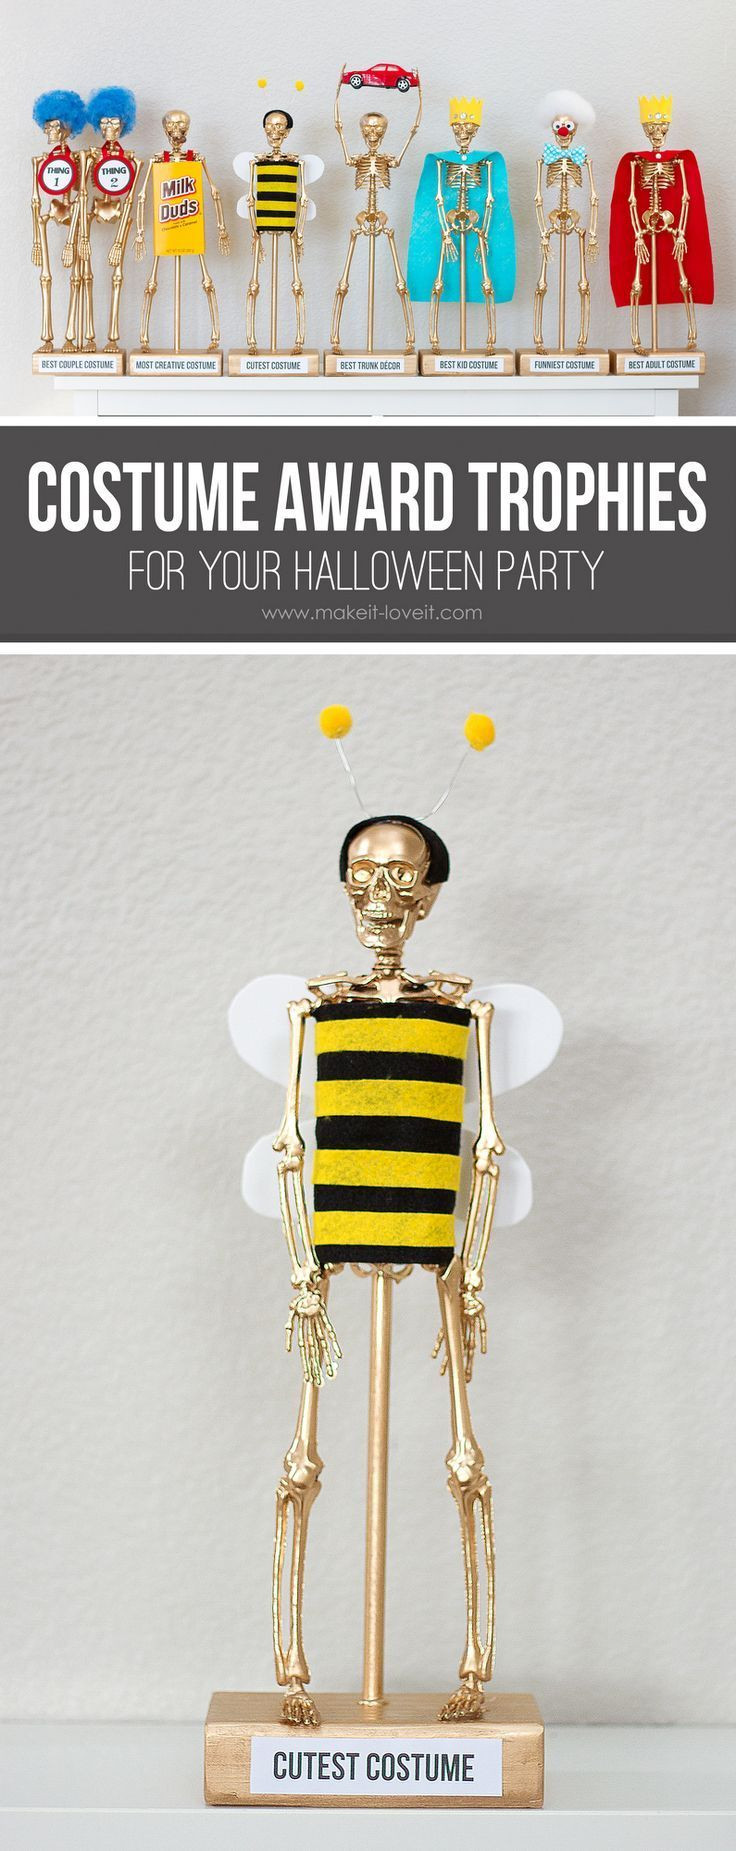 Halloween Party Contest Ideas
 DIY Costume Contest Award Trophies r your Halloween